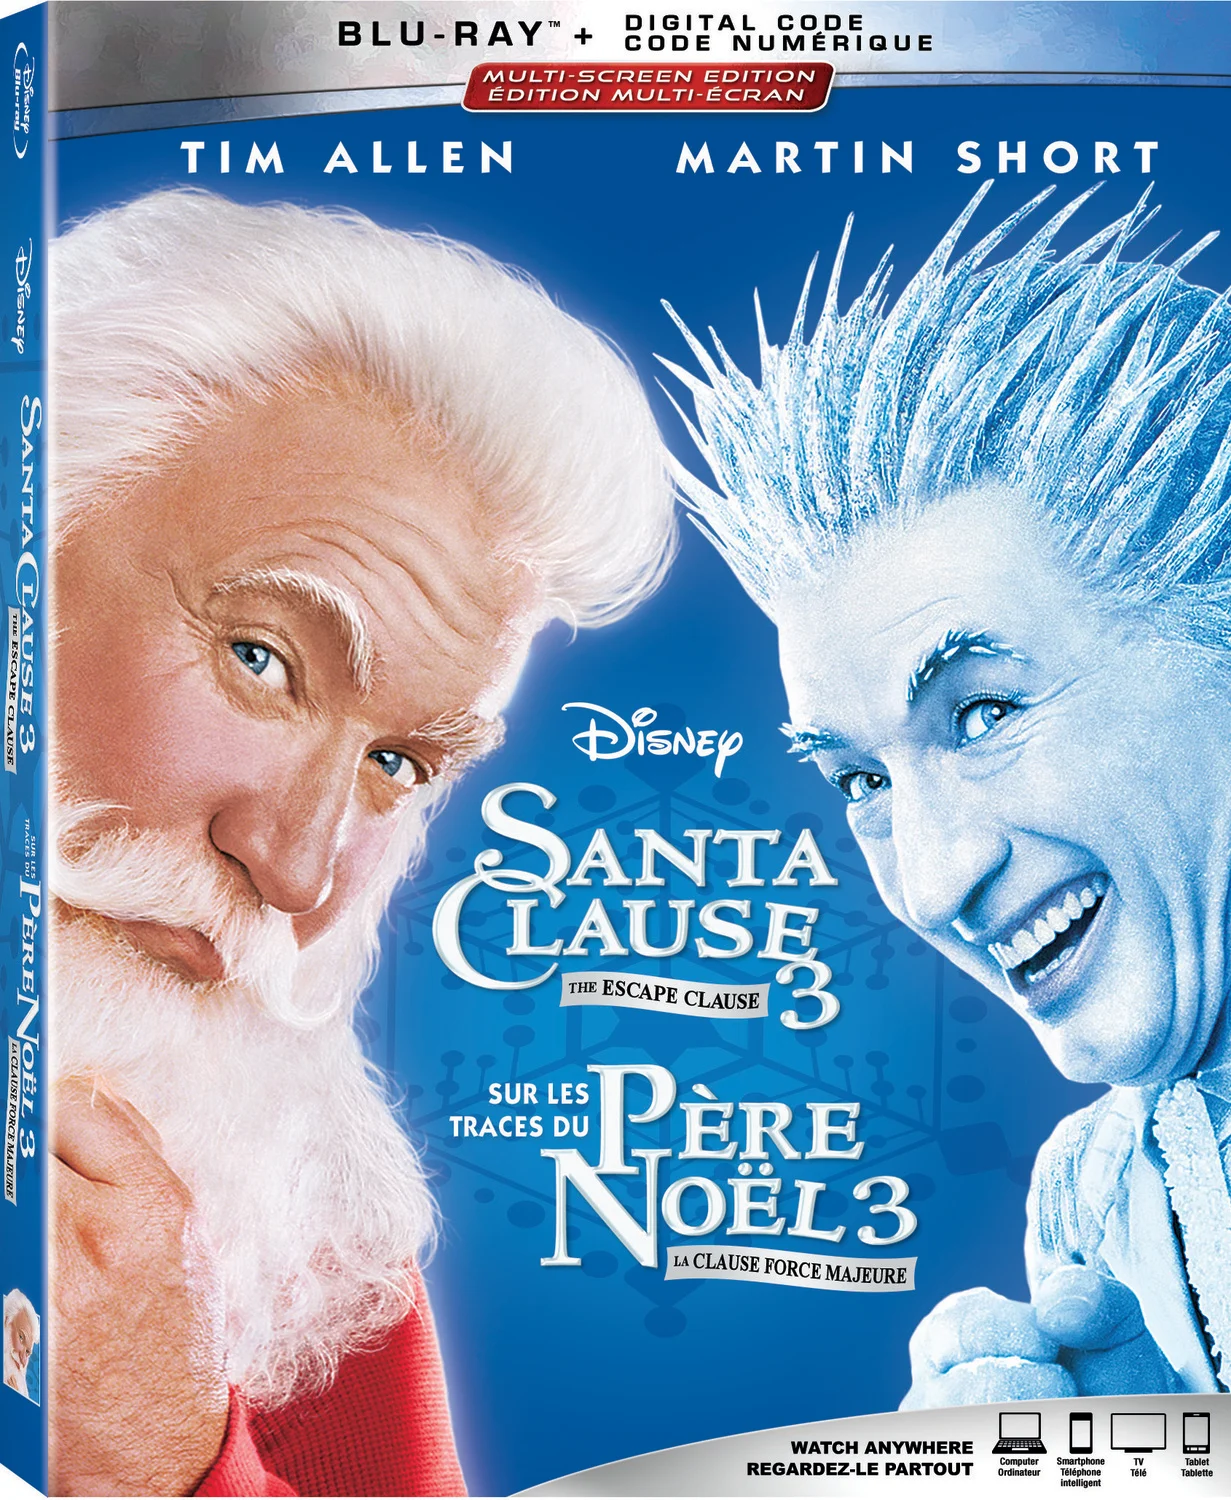 Santa Clause 3, The: The Escape Clause (Blu-ray) on MovieShack